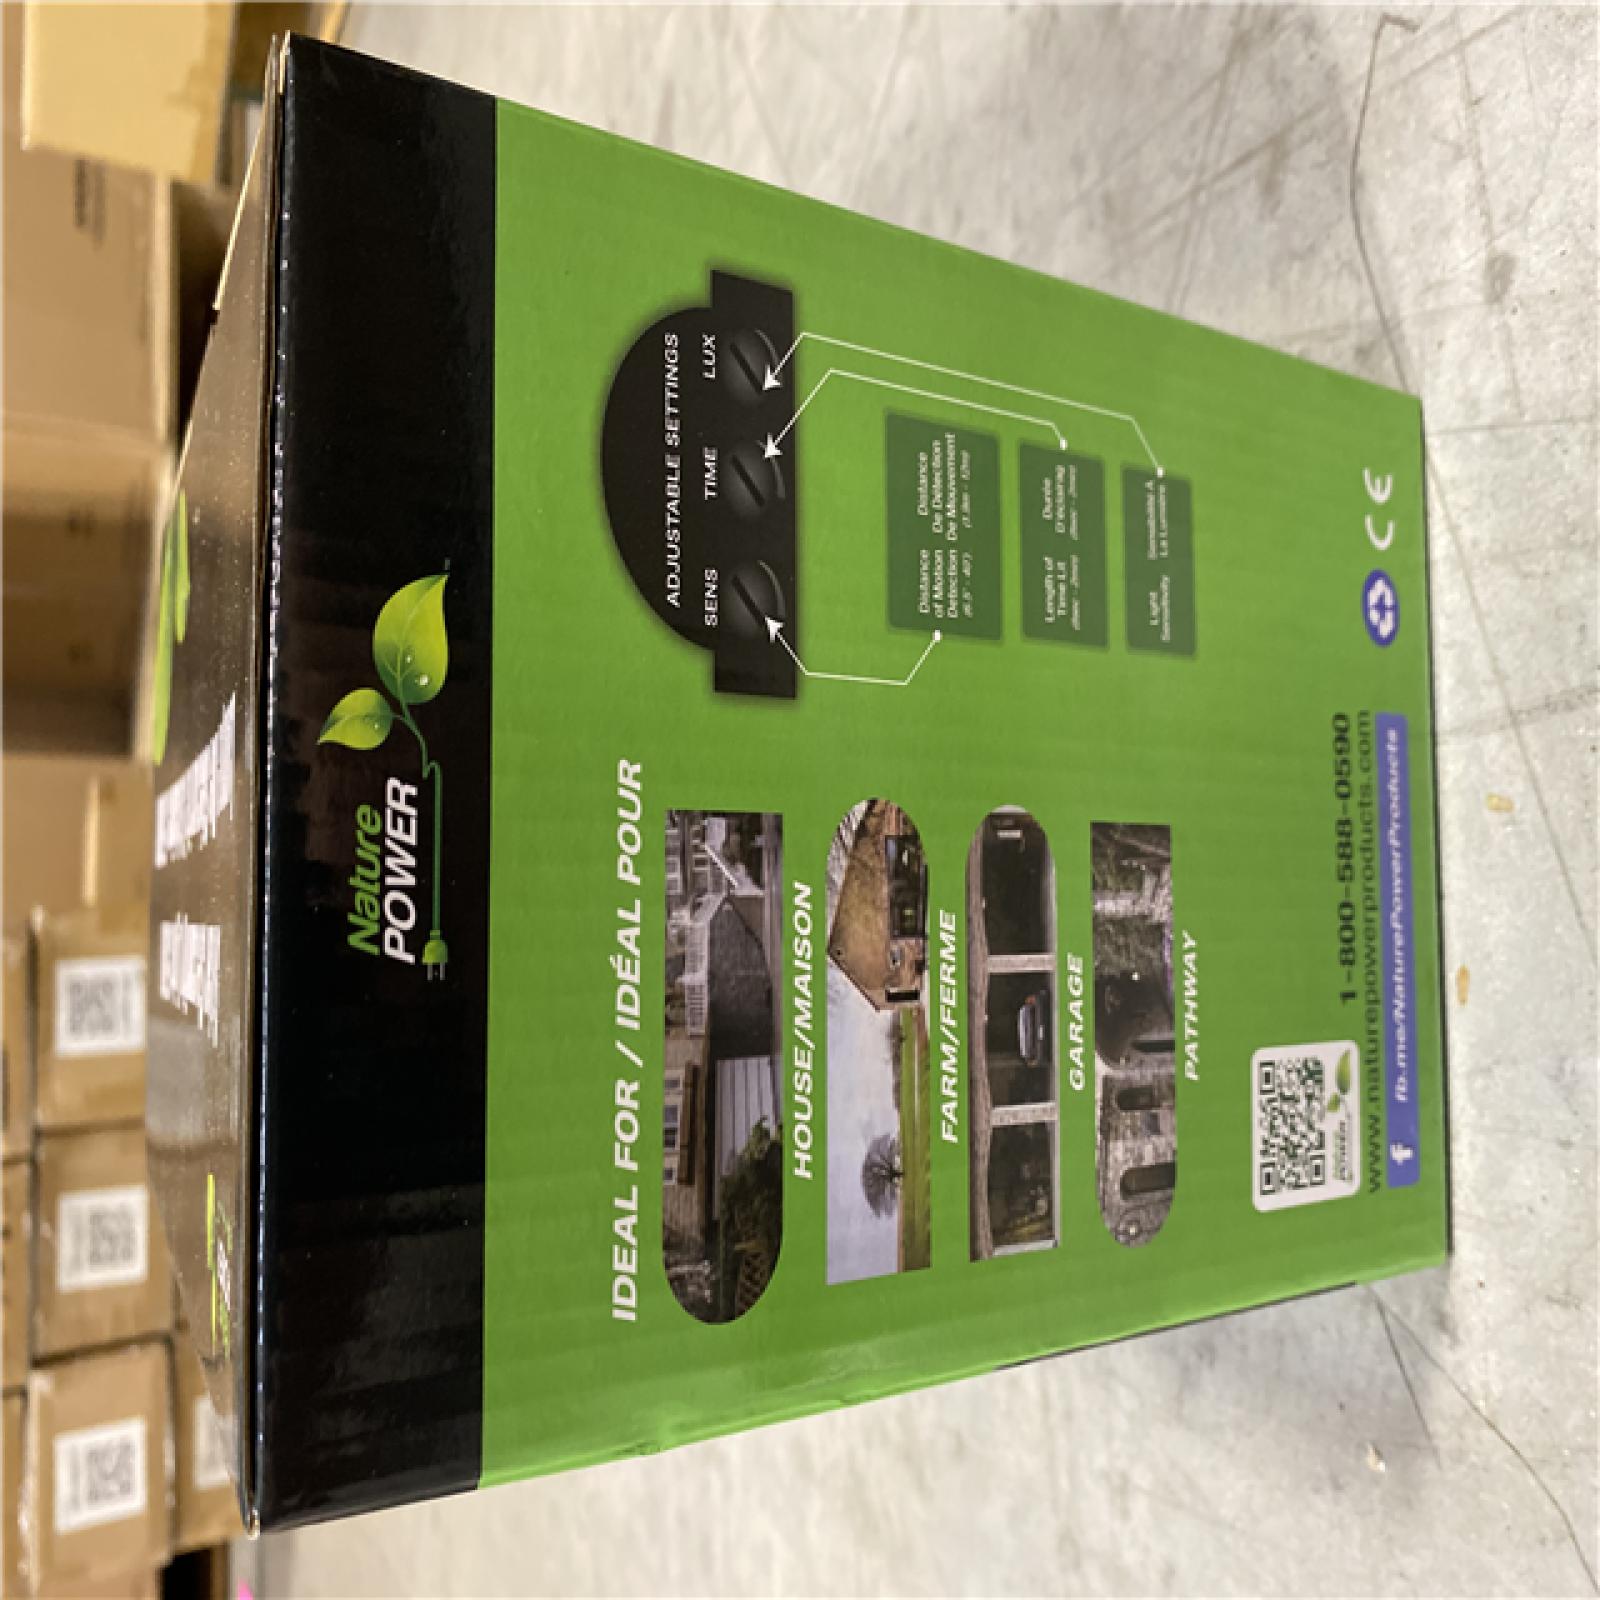 DALLAS LOCATION - NEW! nature power security light 500 lumens PALLET ( 6 UNITS)